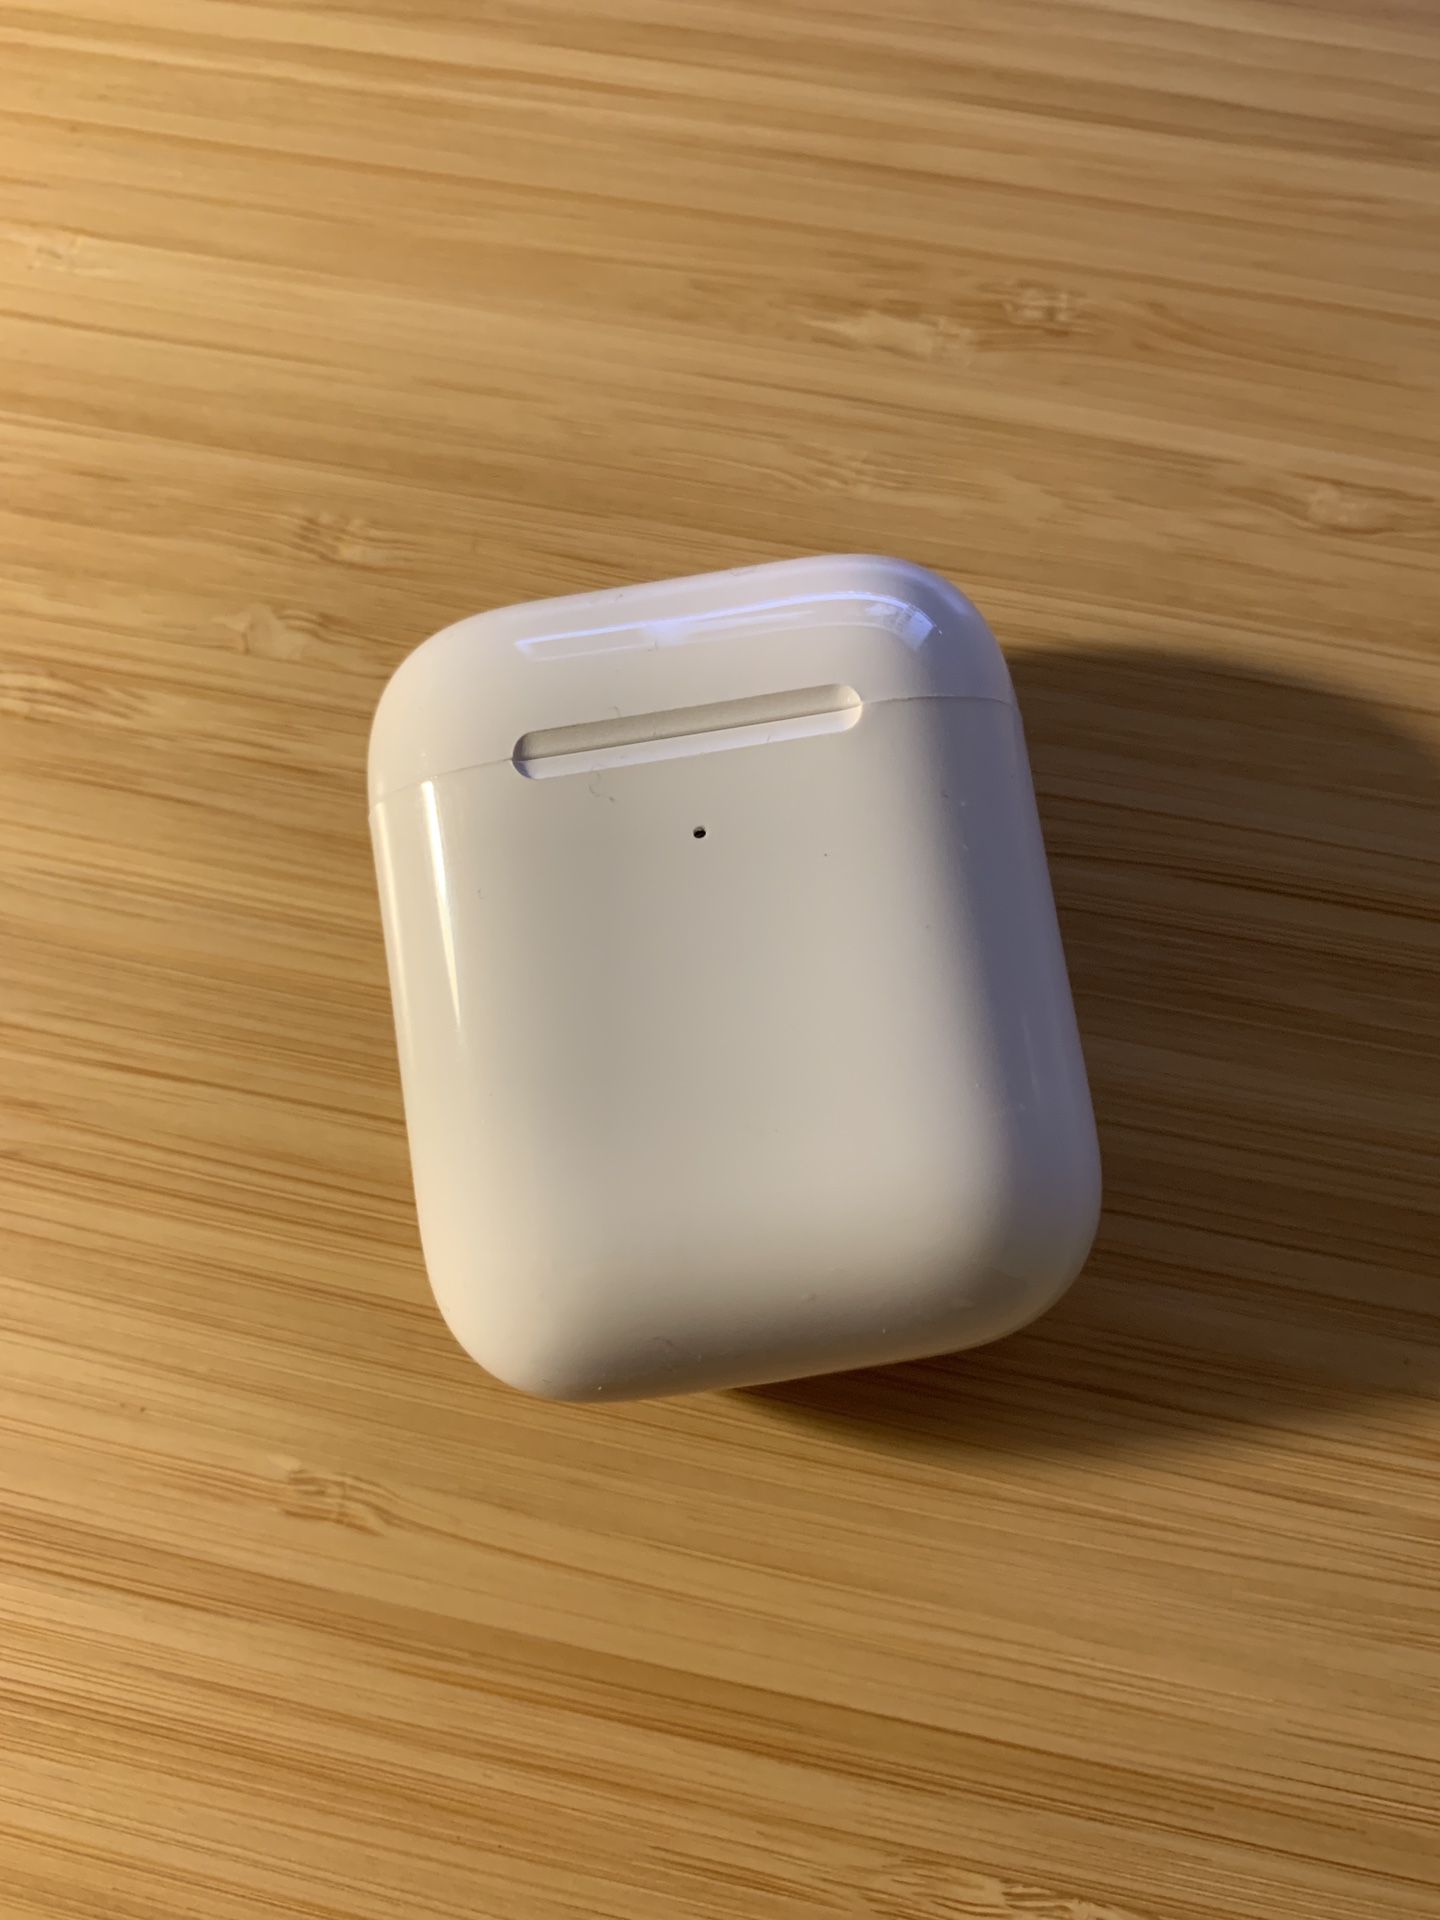 AirPods Super Copy with W1 Chip (Pop up Display for Pairing)